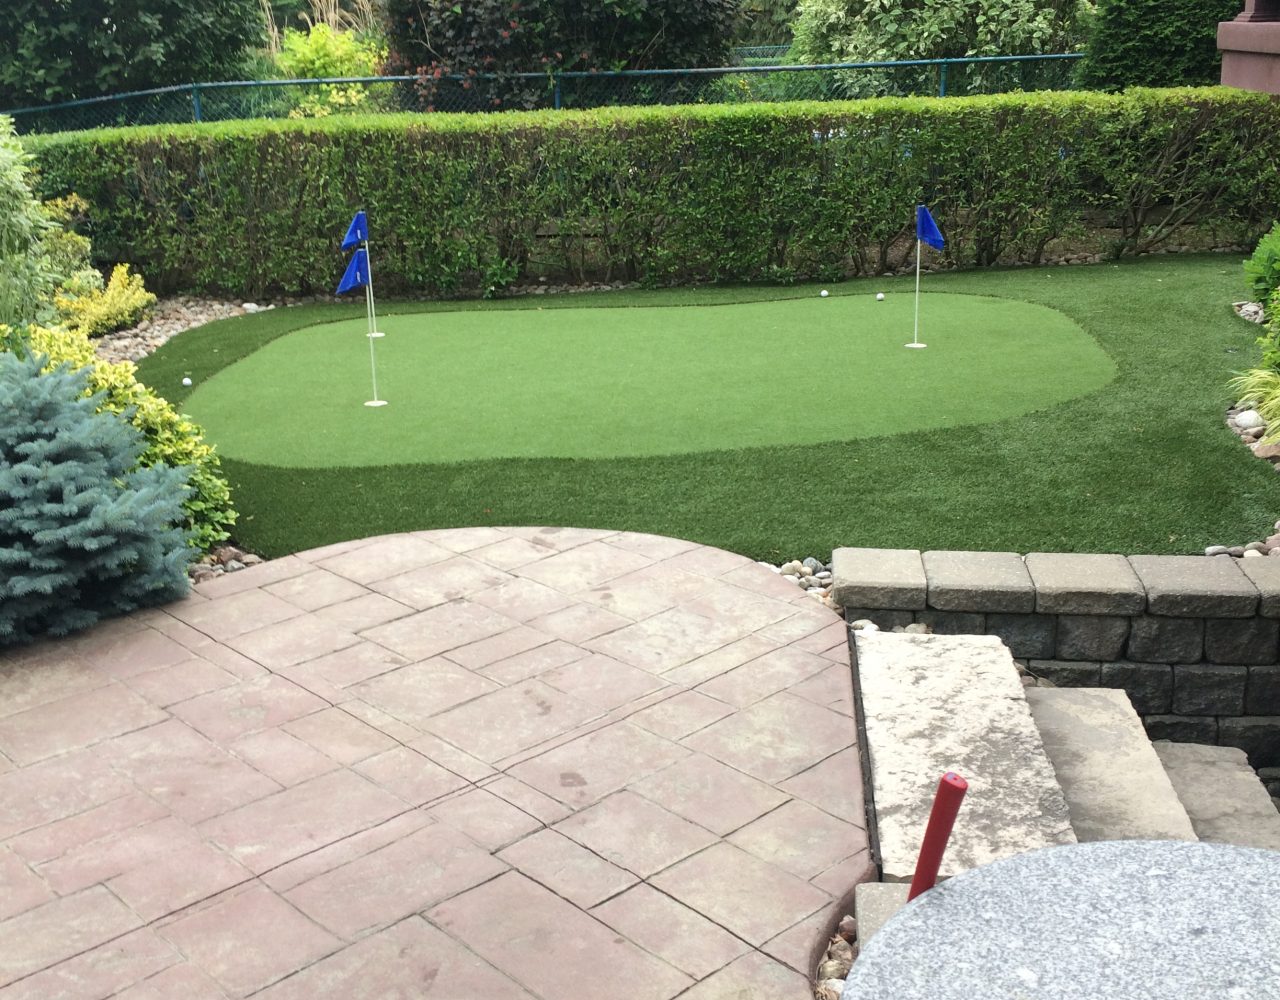 Two hole synthetic putting green for challenging up and downhill putts